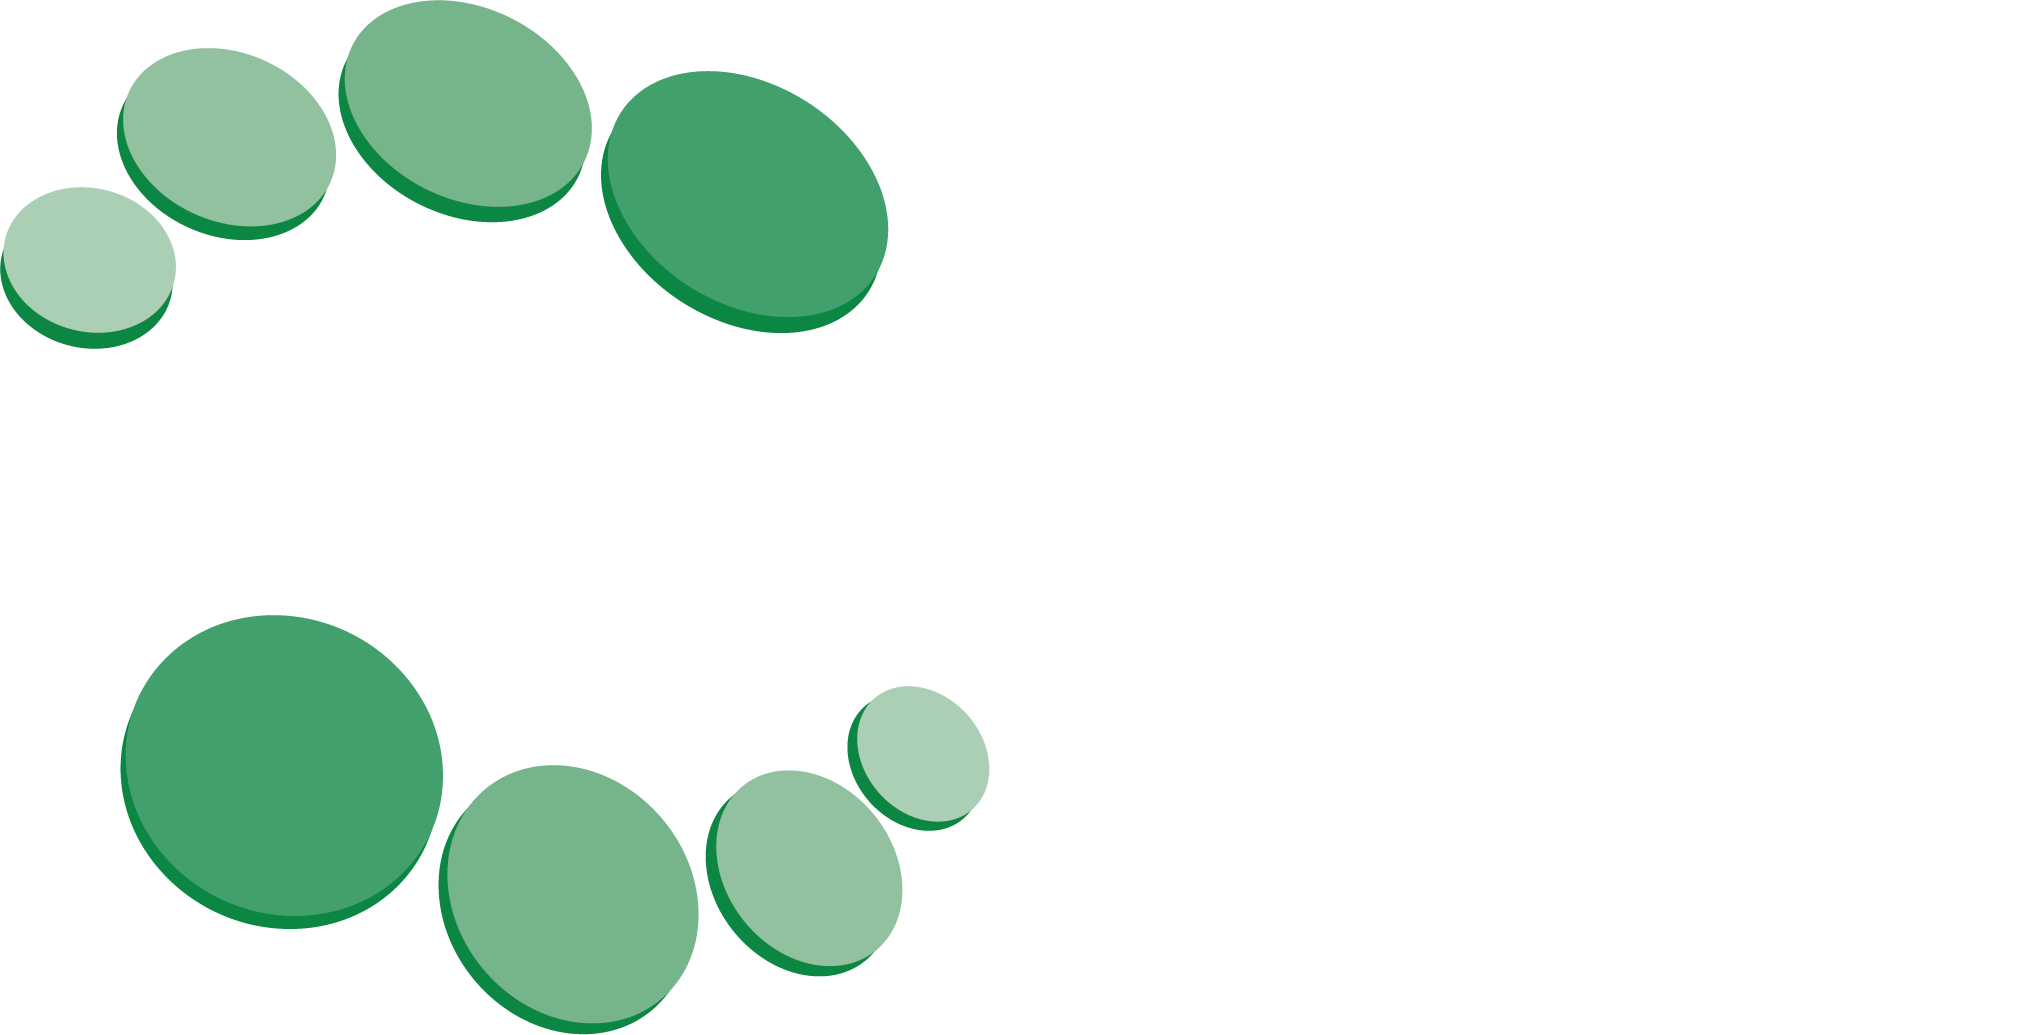 The best healthcare equipment company in the Midwest.